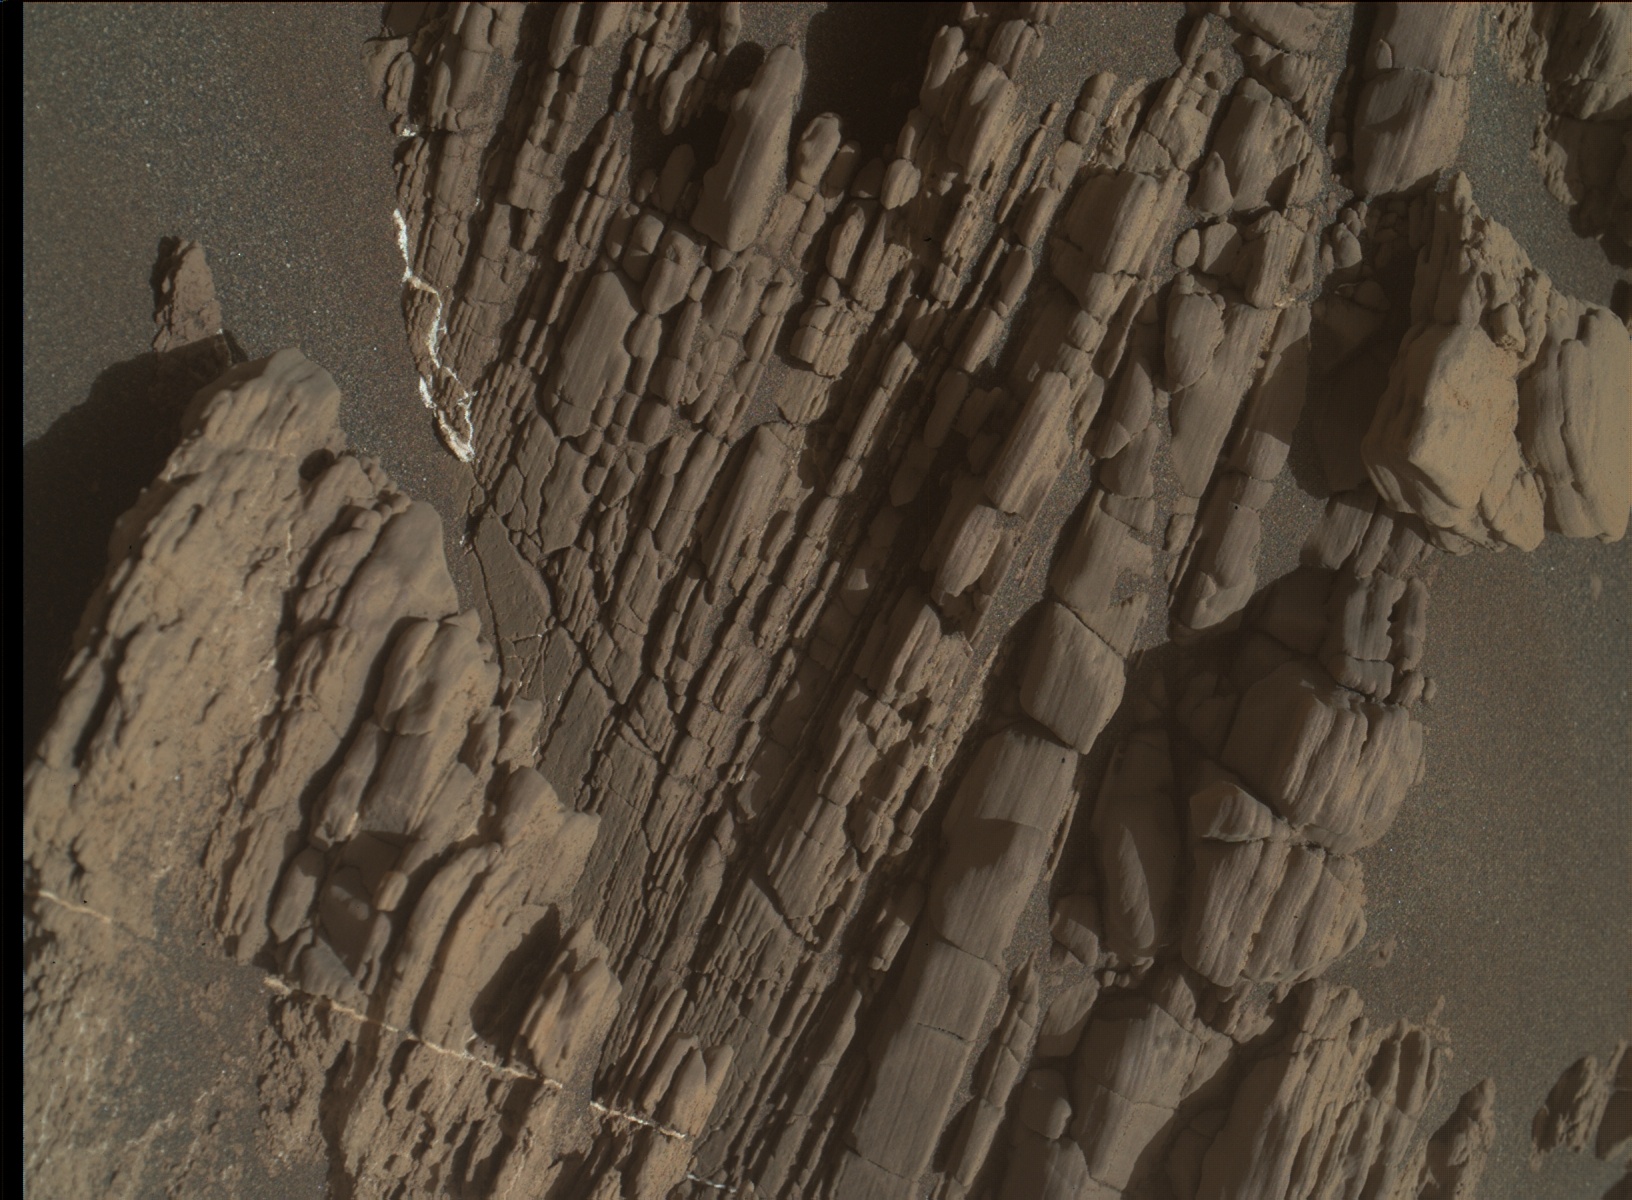 Nasa's Mars rover Curiosity acquired this image using its Mars Hand Lens Imager (MAHLI) on Sol 2477